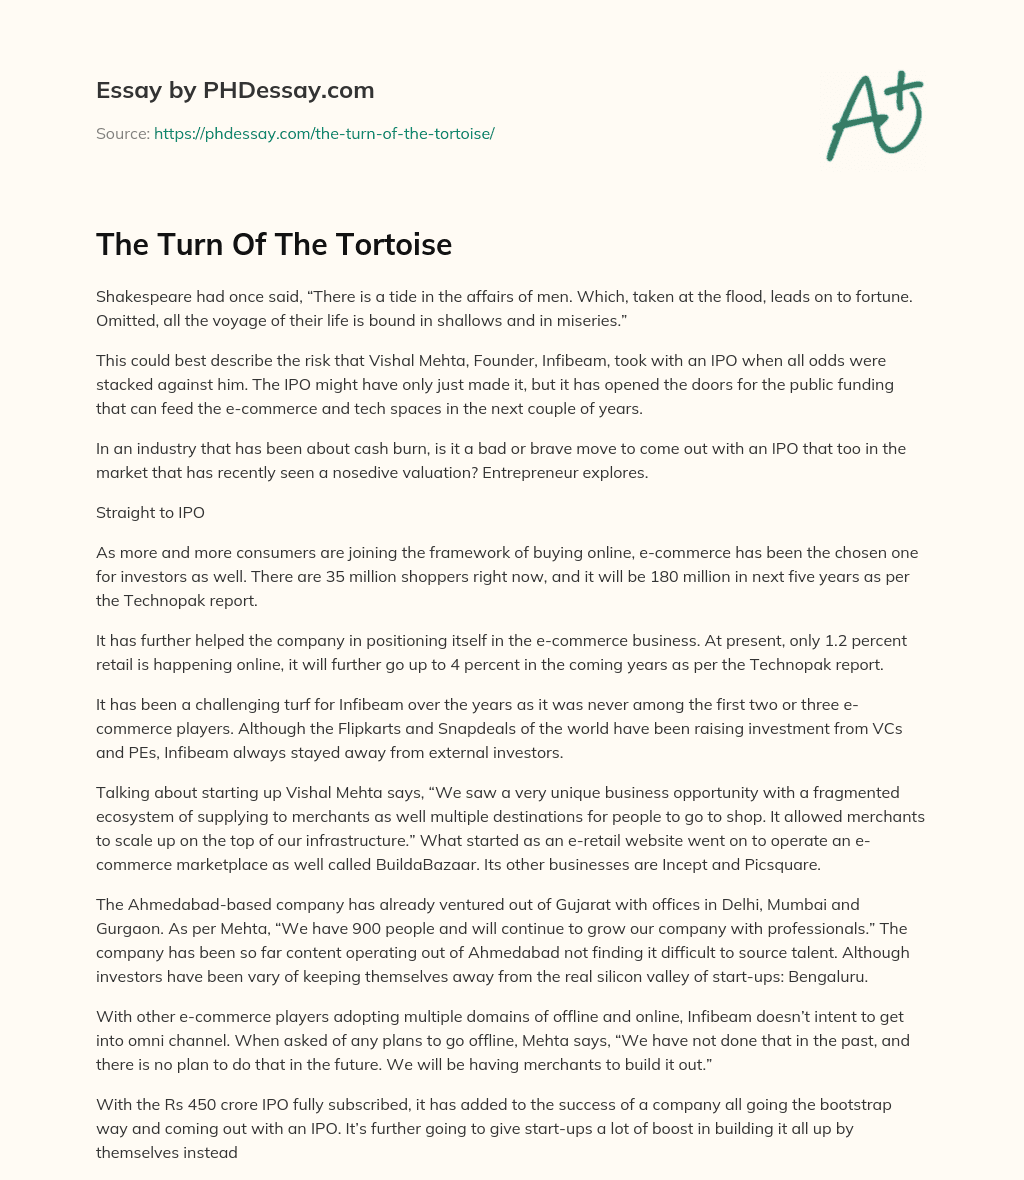 The Turn Of The Tortoise essay